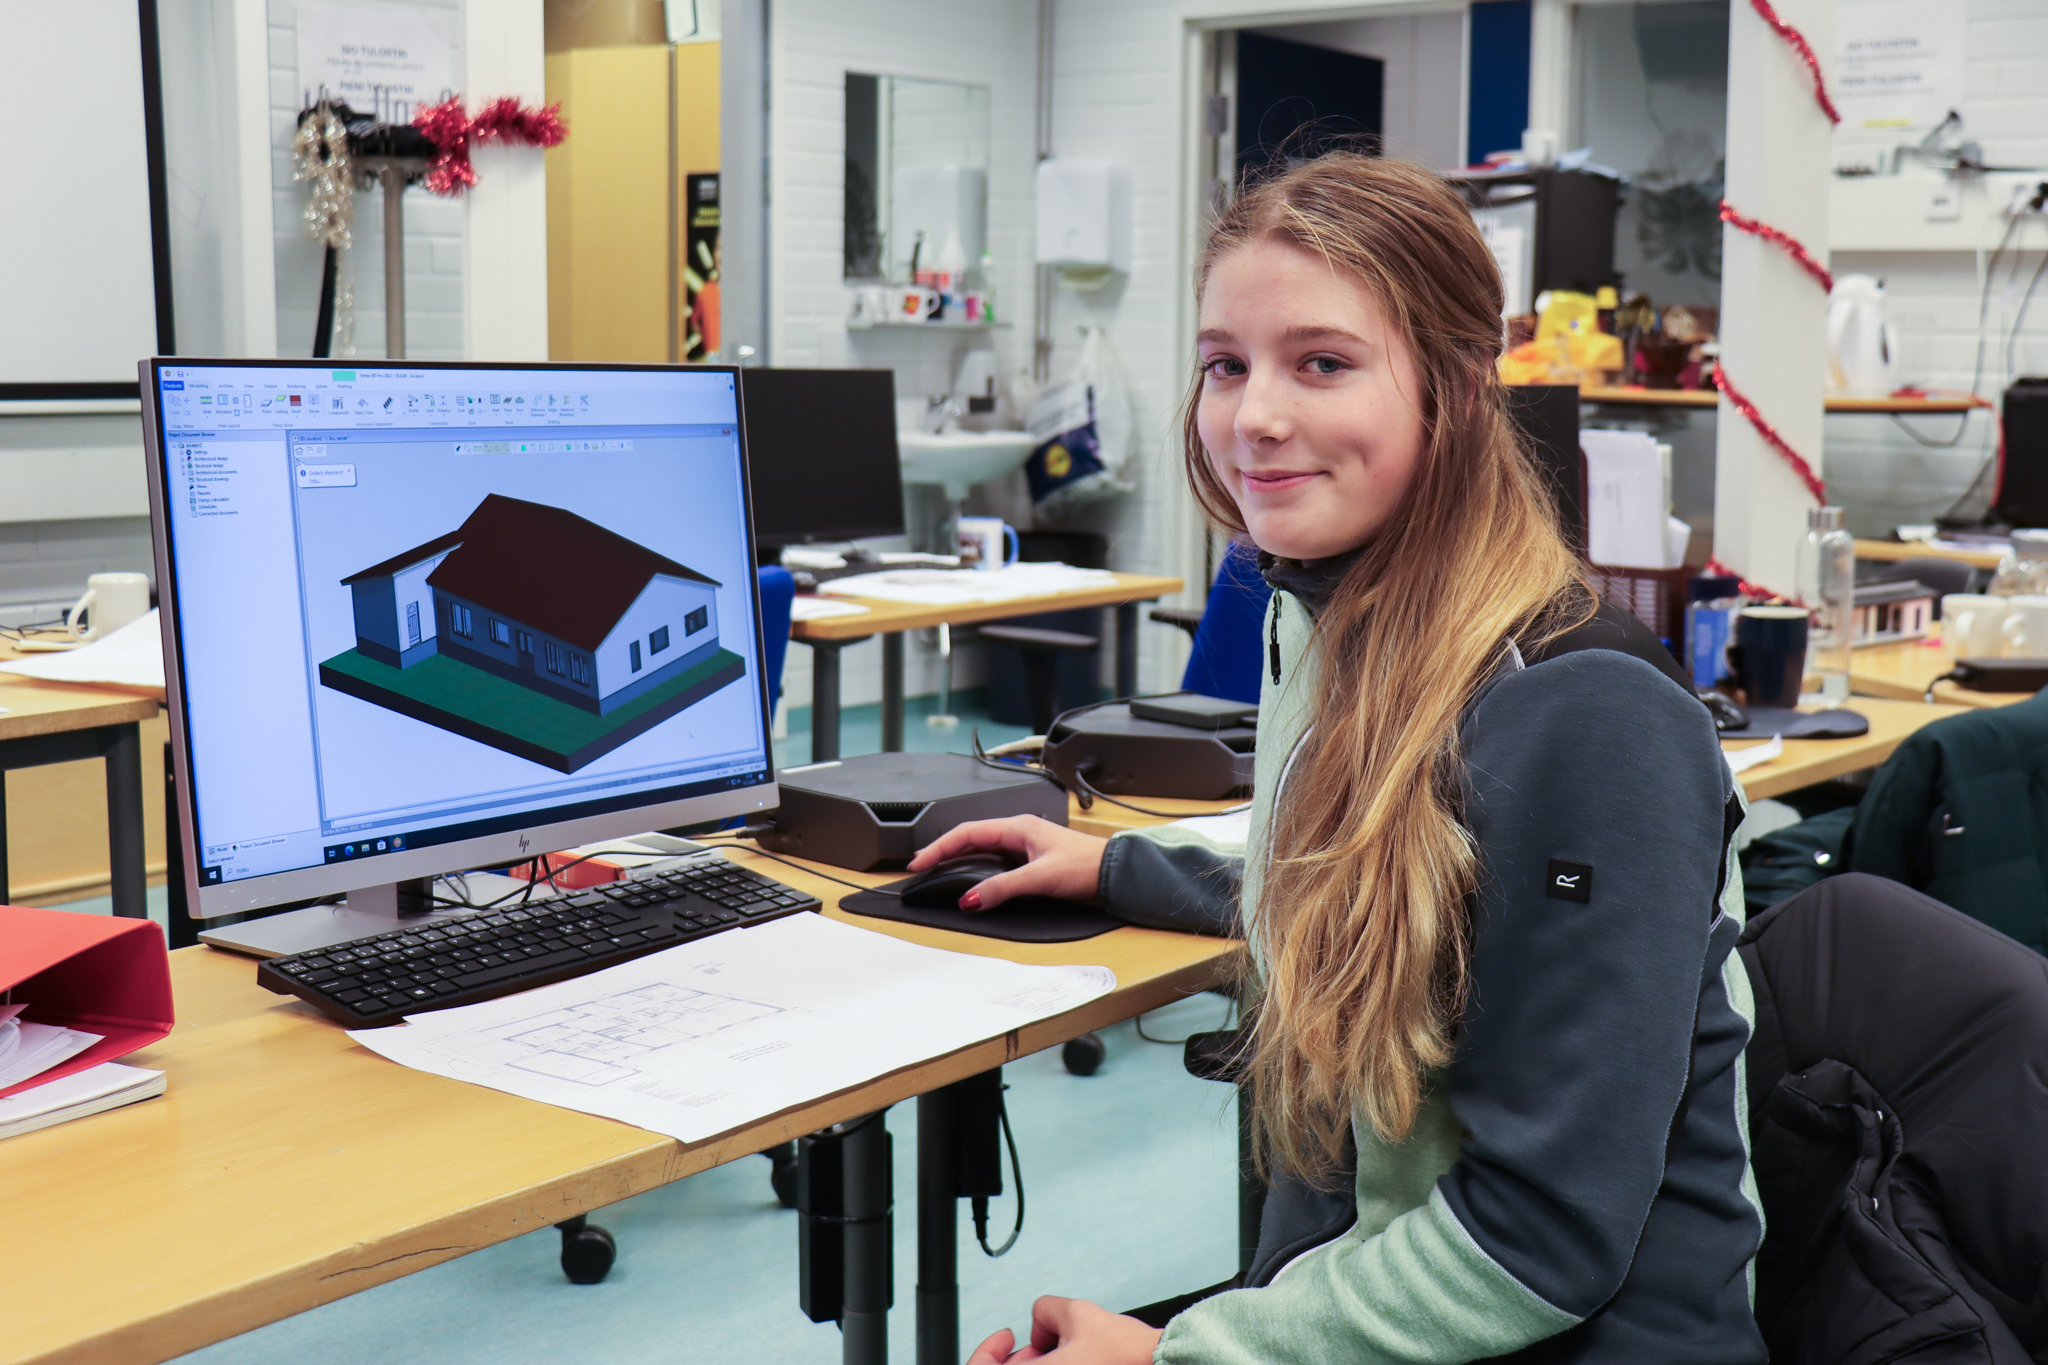 Jocelyn Fleischer presents a 3D-model of a house that she has created with Vertex.